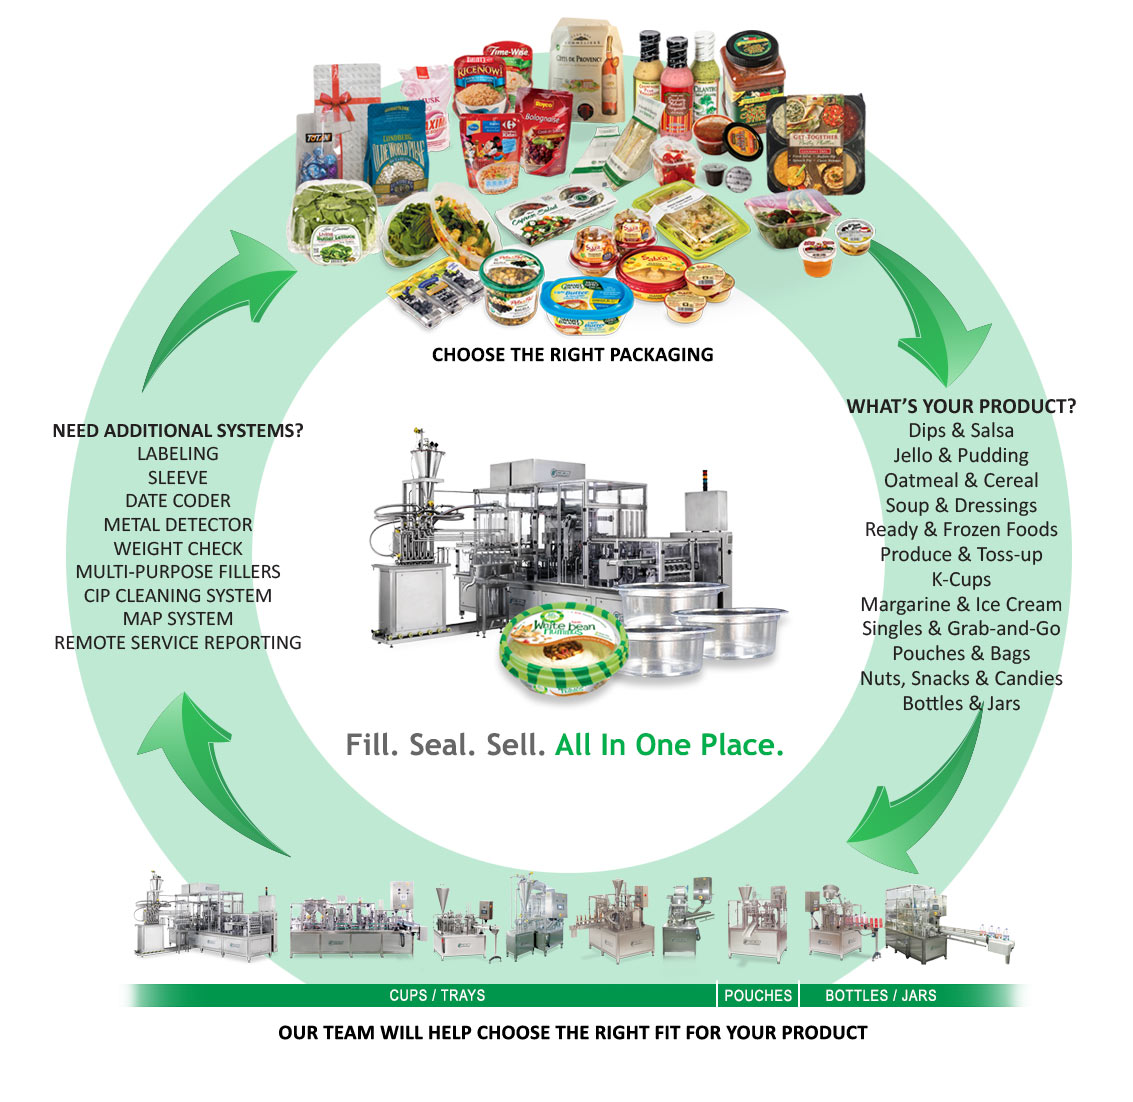 Fill. Seal. Sell - Food Packaging Cycle